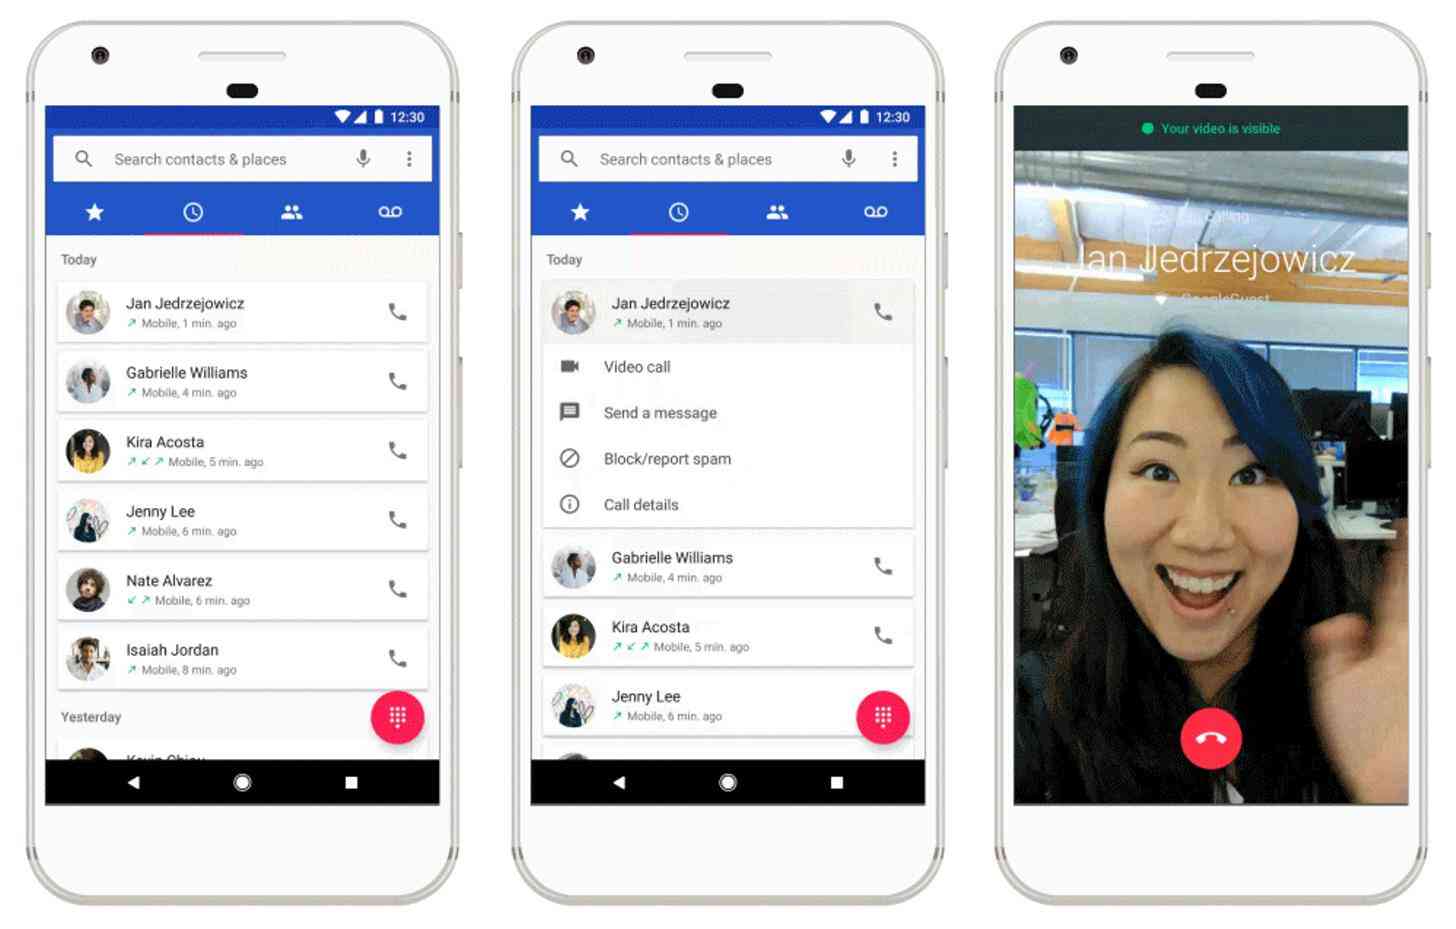 Google Duo video calling integration Phone, Contacts, Messages apps